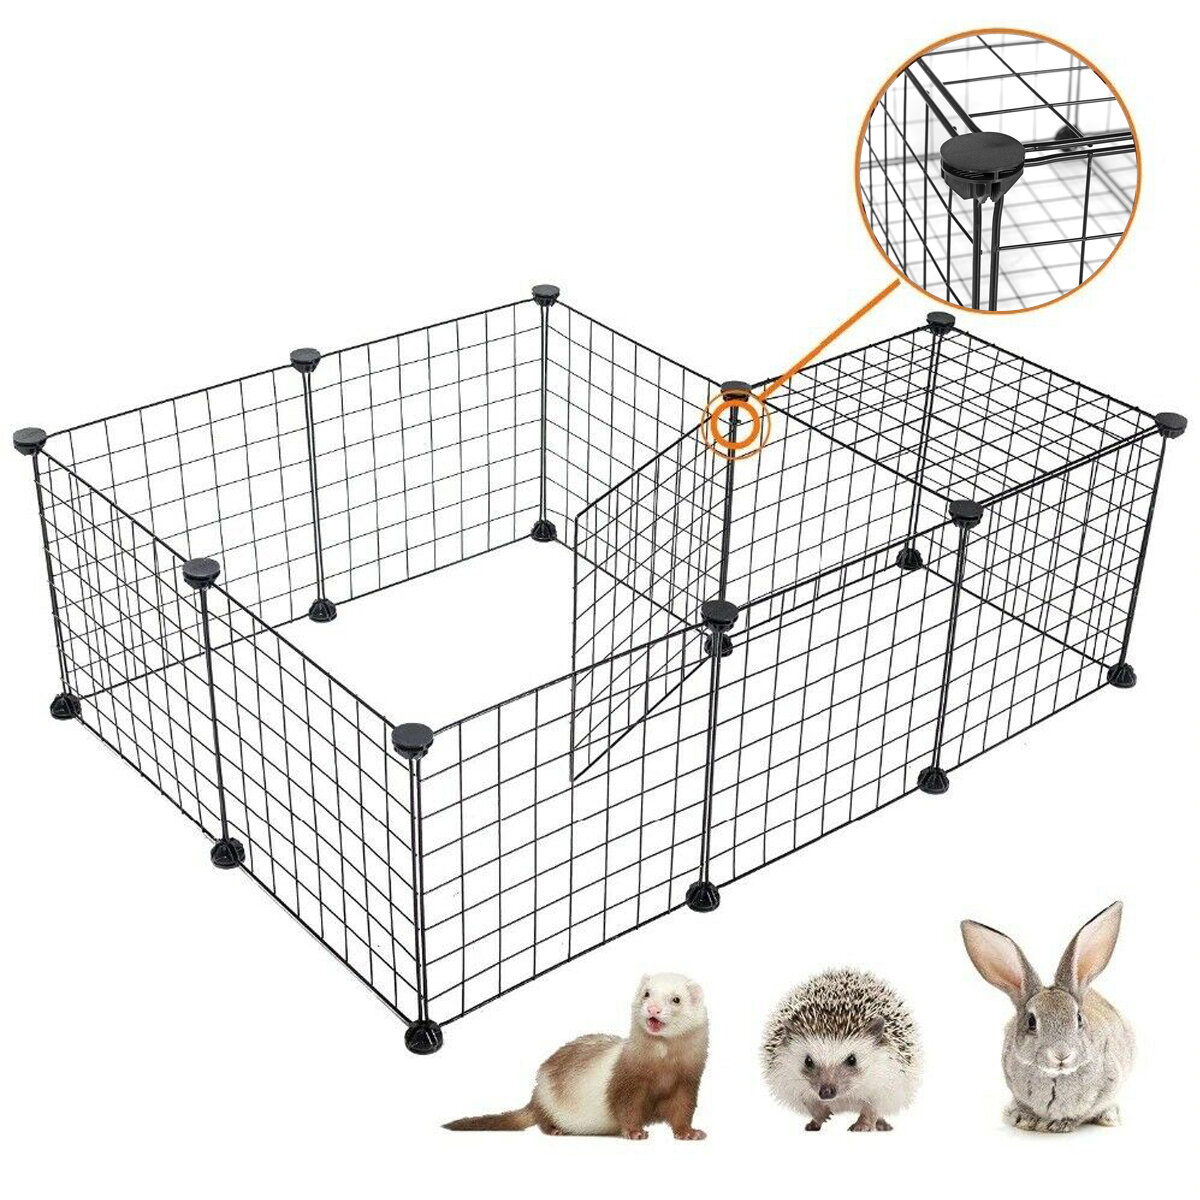 Foldable Pet Playpen Iron Fence Puppy Kennel House Exercise Training Puppy Space Dog Supplies Rabbits Guinea Pig Cage Sl